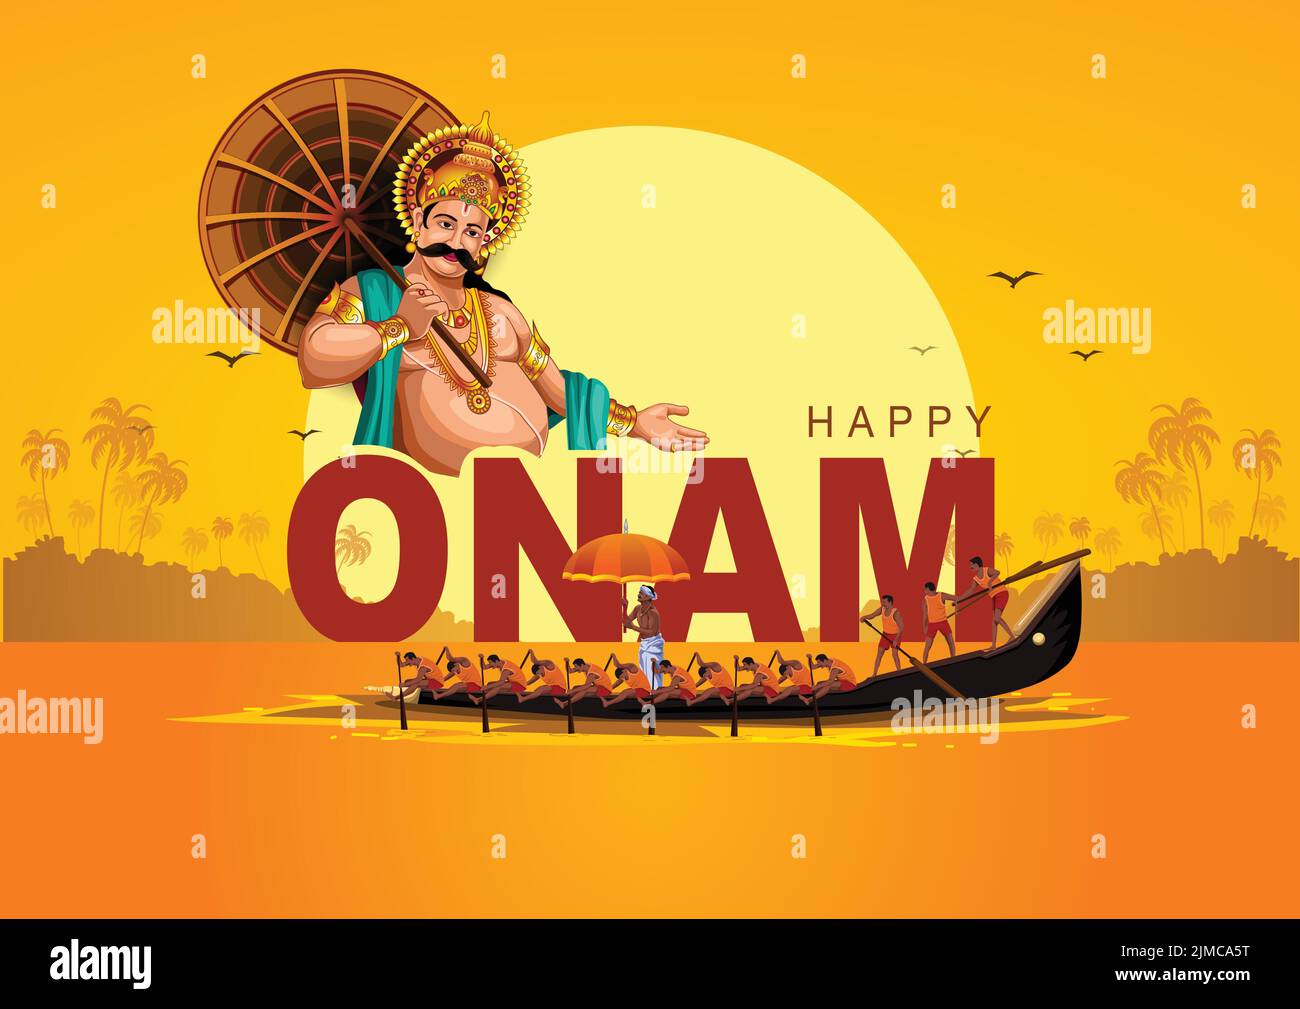 mahabali or maveli, Kerala old king. he is coming for every year. happy onam celebration. vector illustration design Stock Vector